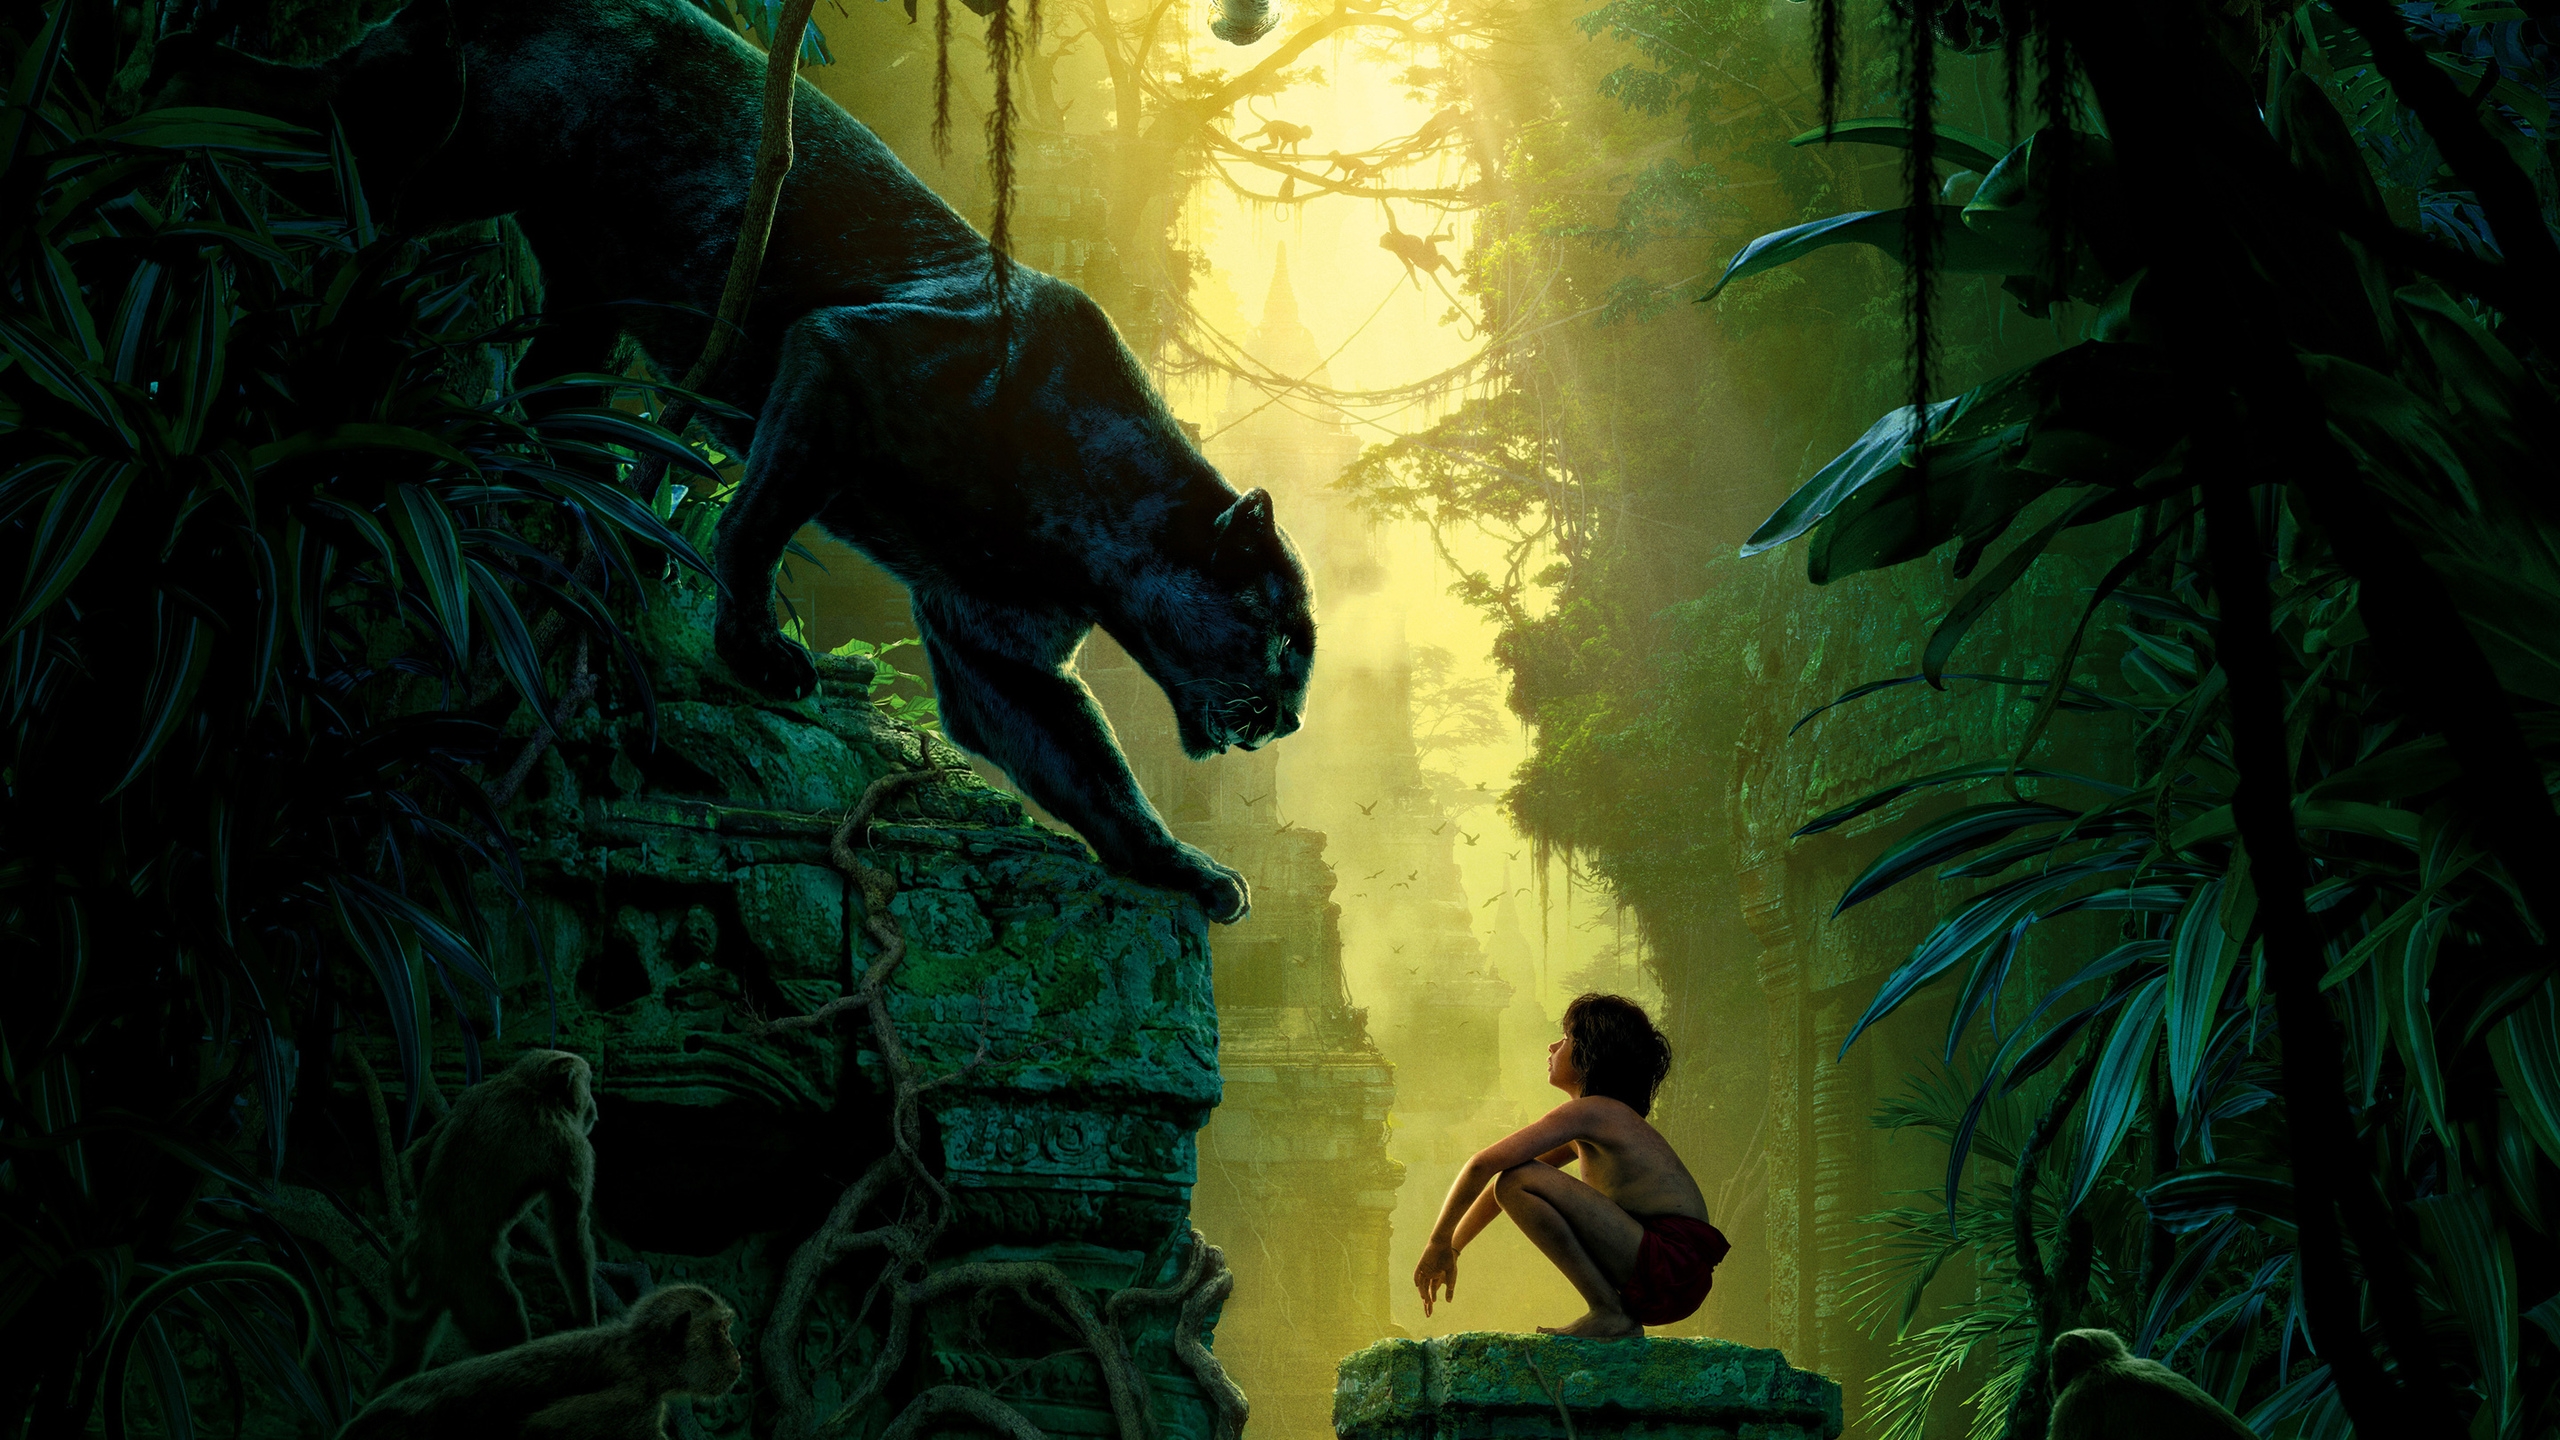 The Jungle Book Movie for 2560x1440 HDTV resolution